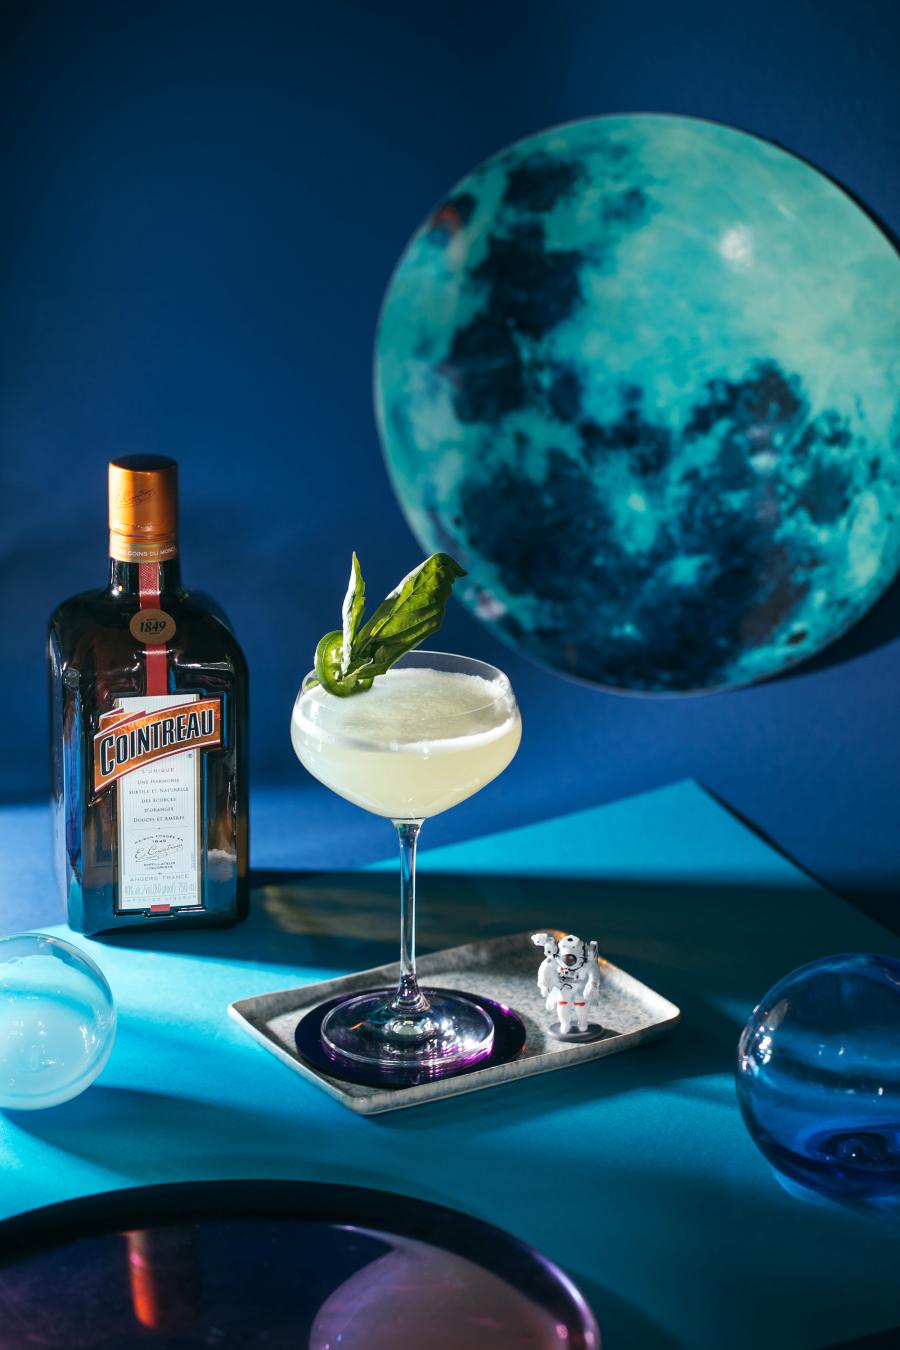 Golden Globes 2019: Cocktails Inspired by The Favorite, Black Panther and Other Nominees